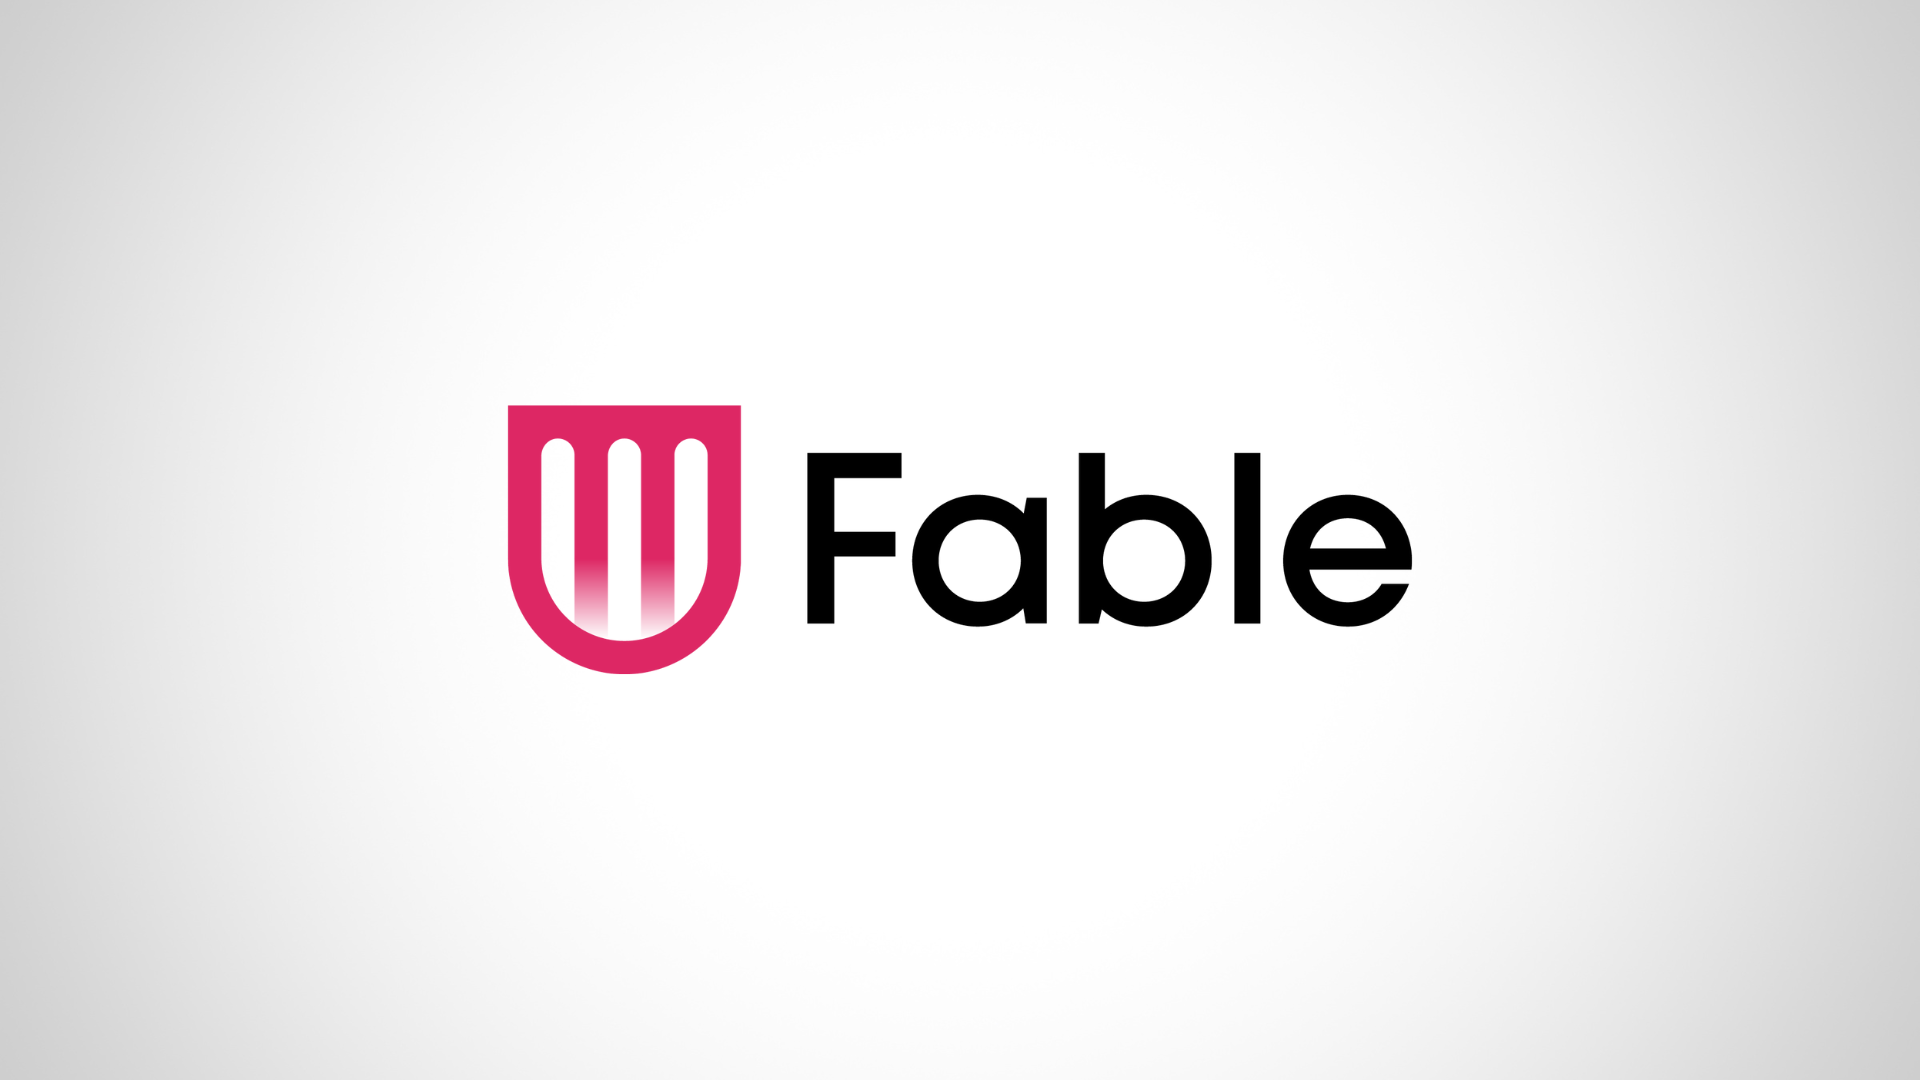 Launch Your Career in Tech with Fable